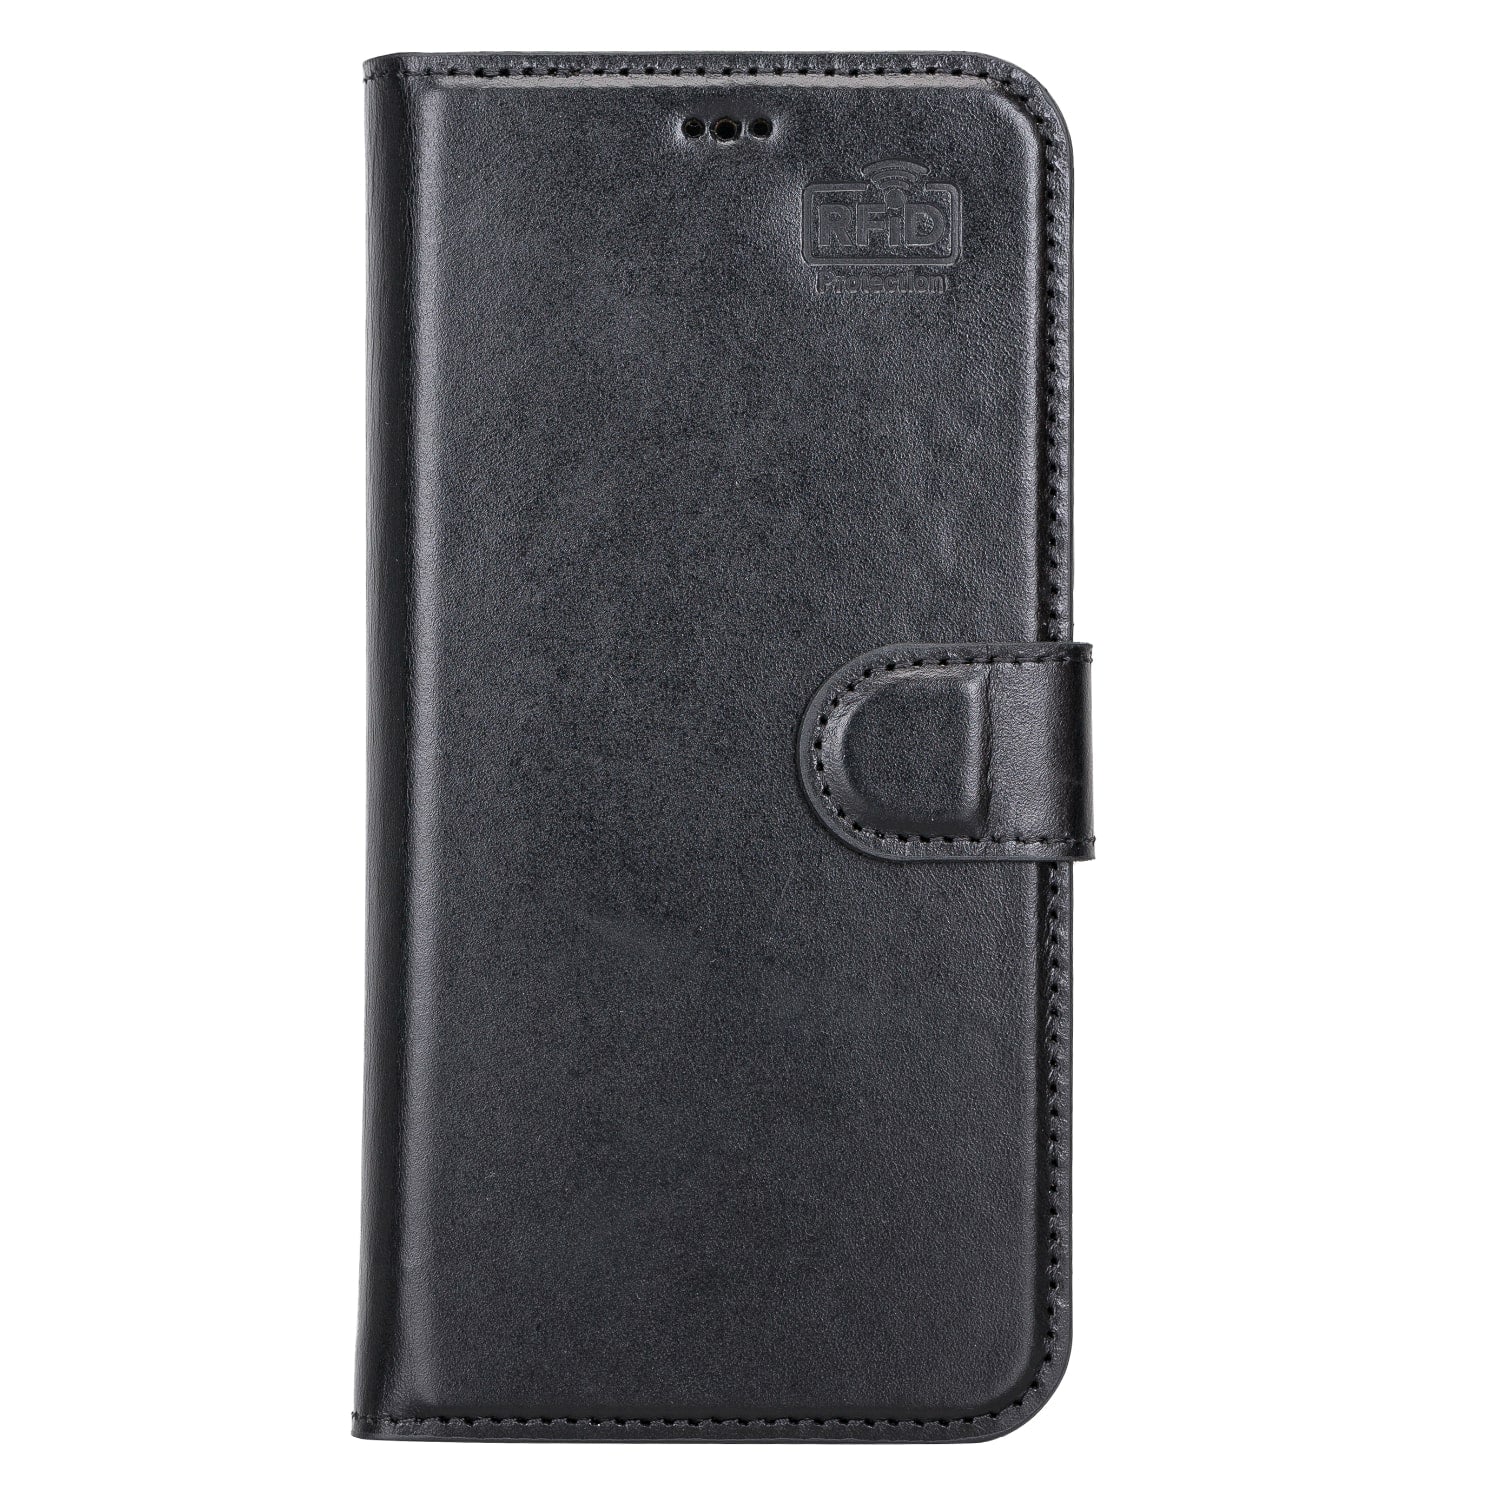 Luxury Black Leather iPhone 13 Pro Wallet Case with MagSafe & RFID Card Holder - Bomonti - 6